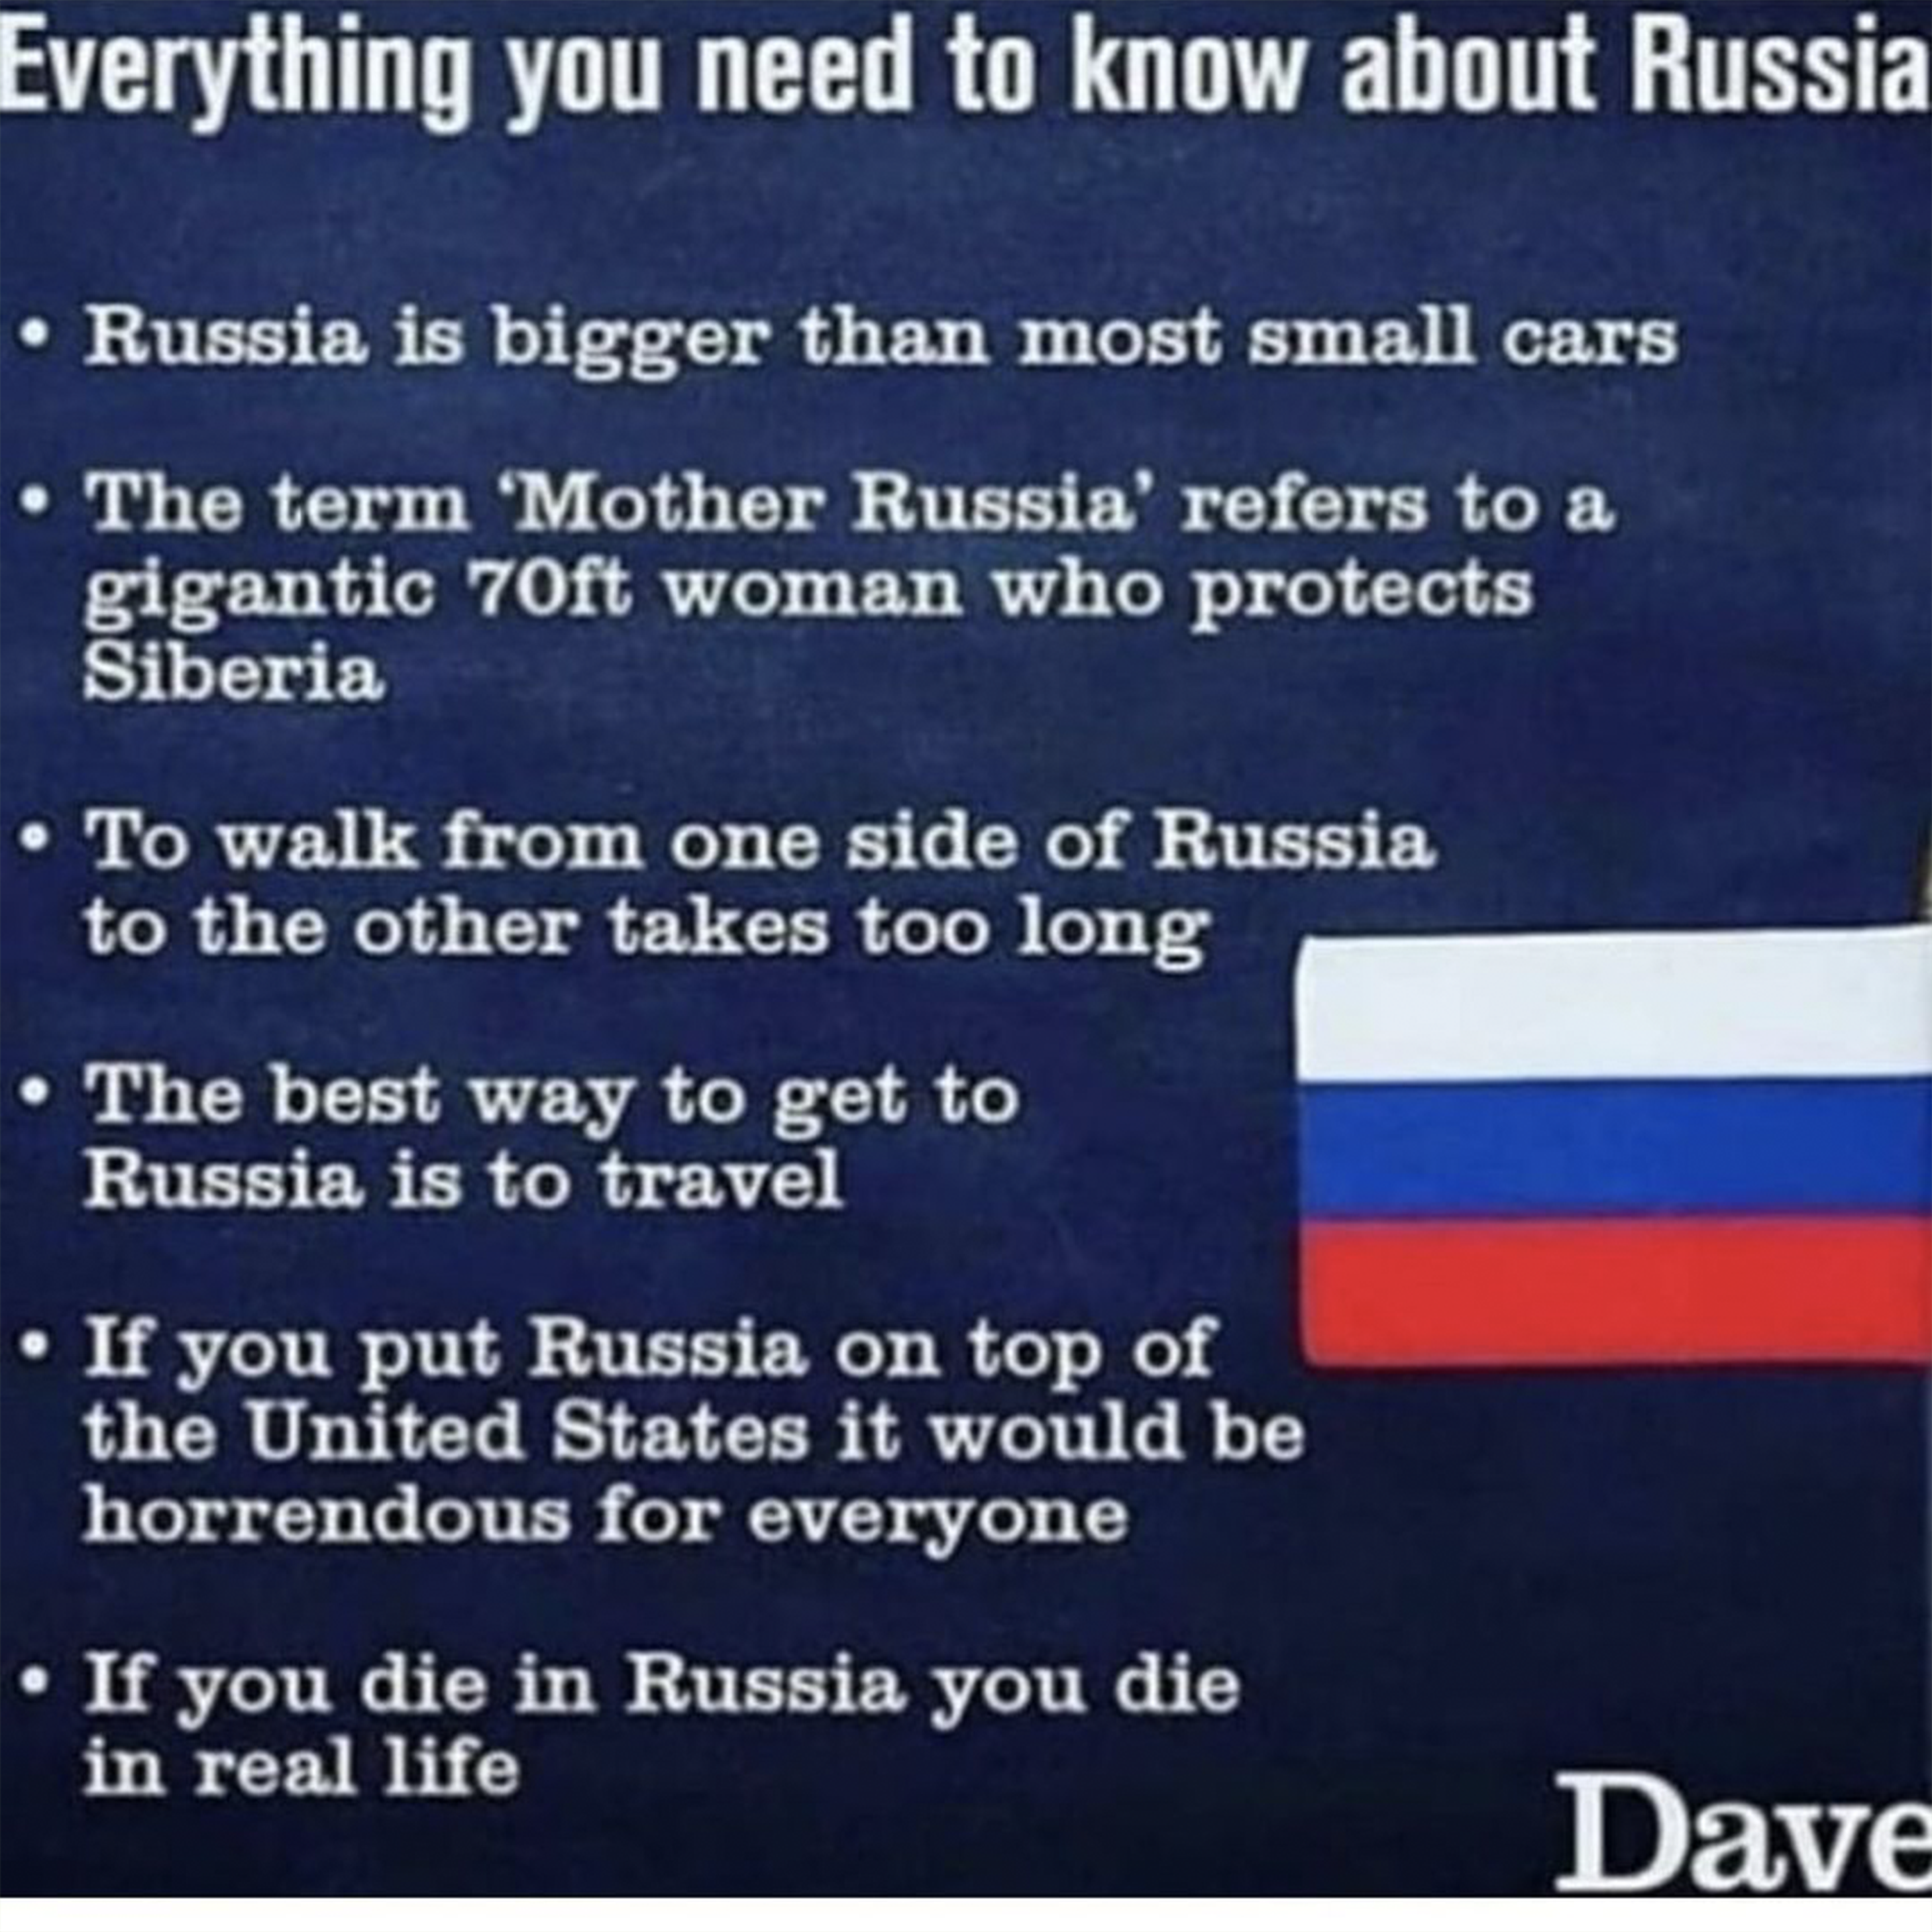 Everything you need to know about Russia:

                        • Russia is bigger than most small cars.
                        
                        • The term 'Mother Russia' refers to a gigantic 70ft woman who protects Siberia.
                        
                        • To walk from one side of Russia to the other takes too long.
                        
                        • The best way to get to Russia is to travel.
                        
                        • If you put Russia on top of the United States, it would be horrendous for everyone.
                        
                        • If you die in Russia, you die in real life.